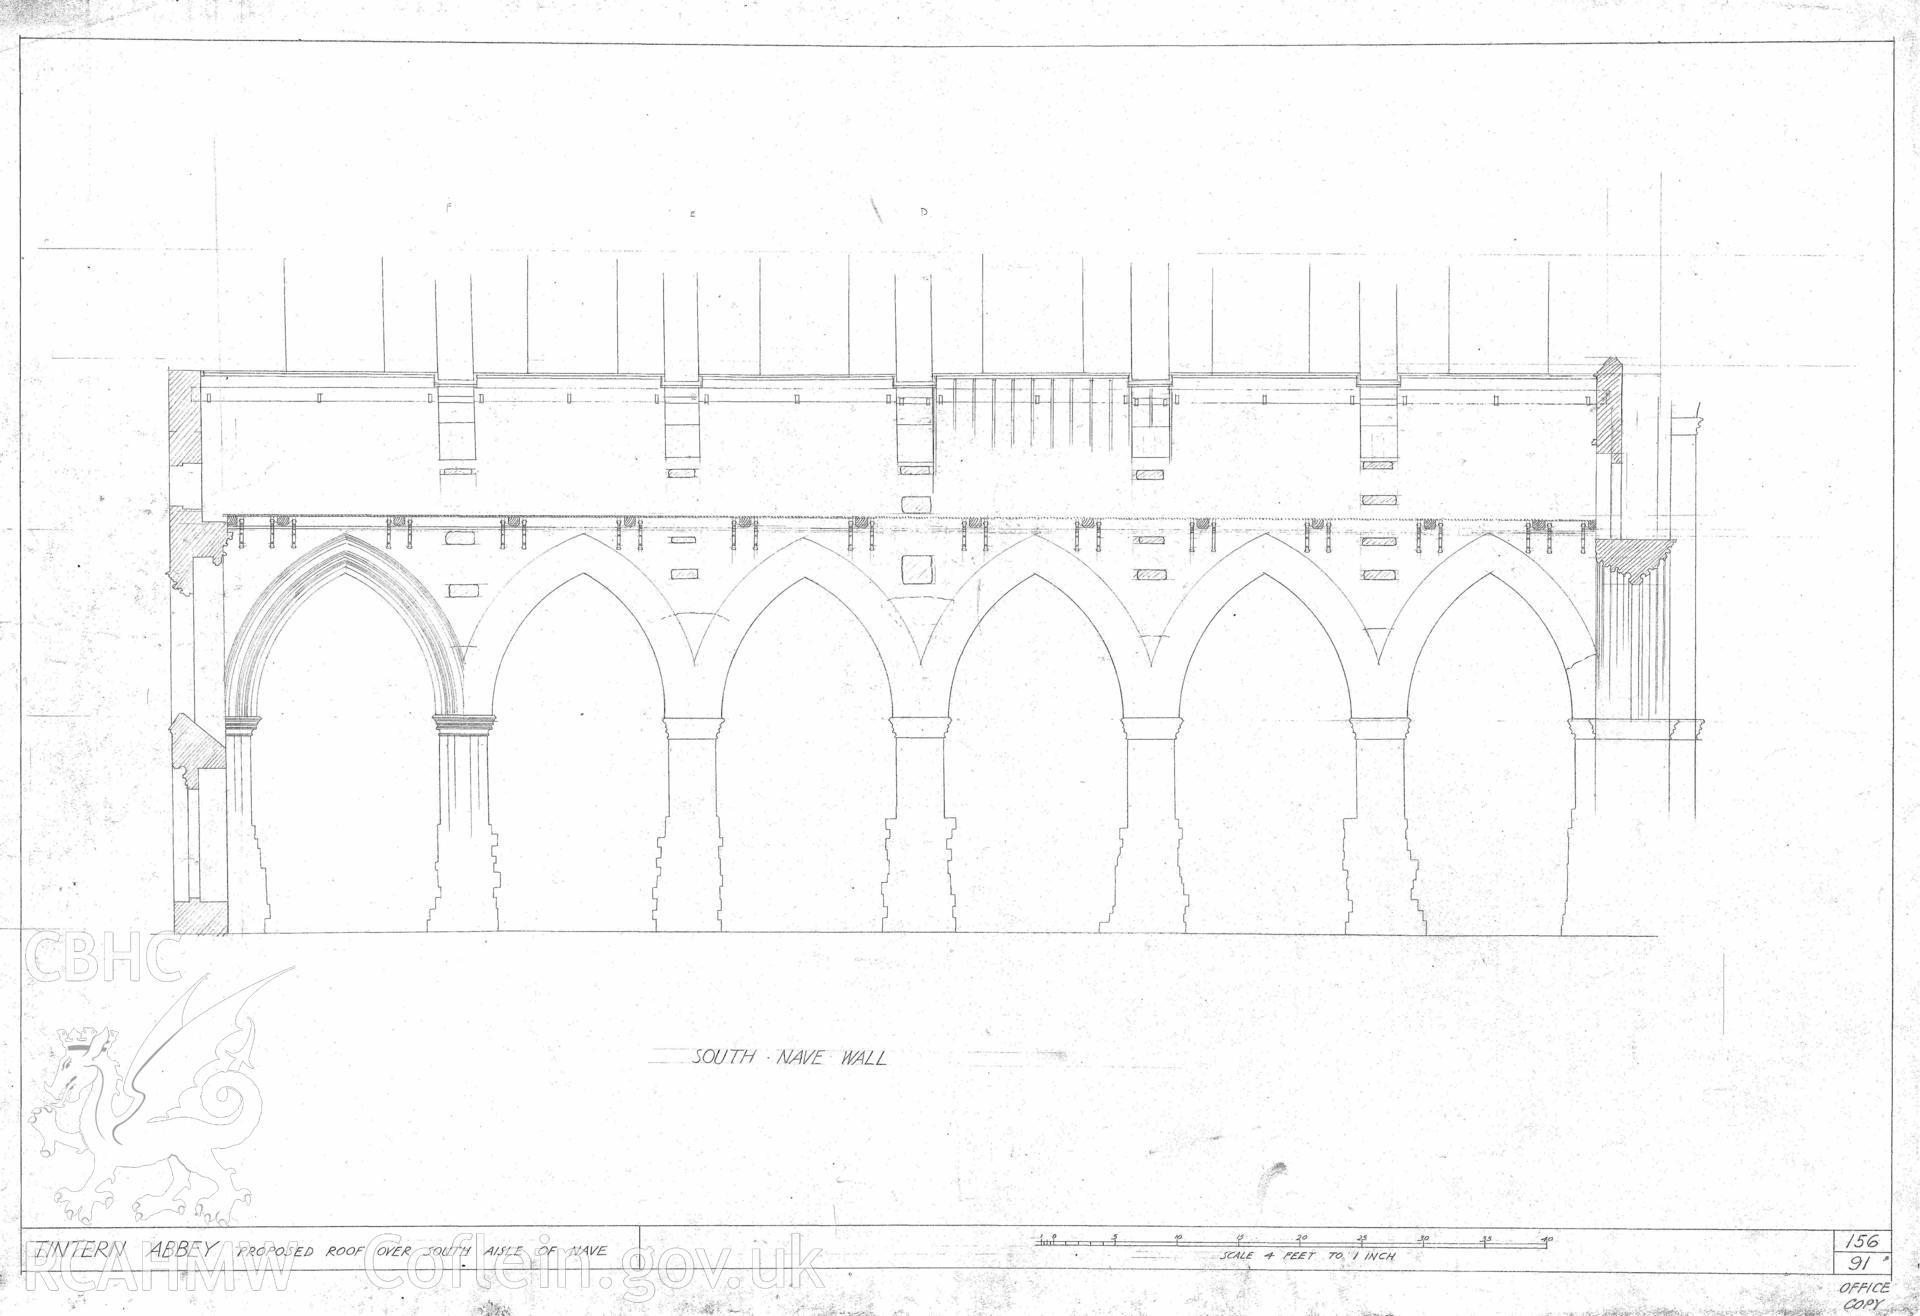 Cadw guardianship monument drawing of Tintern Abbey. Proposed roof over S Aisle of Nave. Cadw ref. No. 156/91. Scale 1:48.